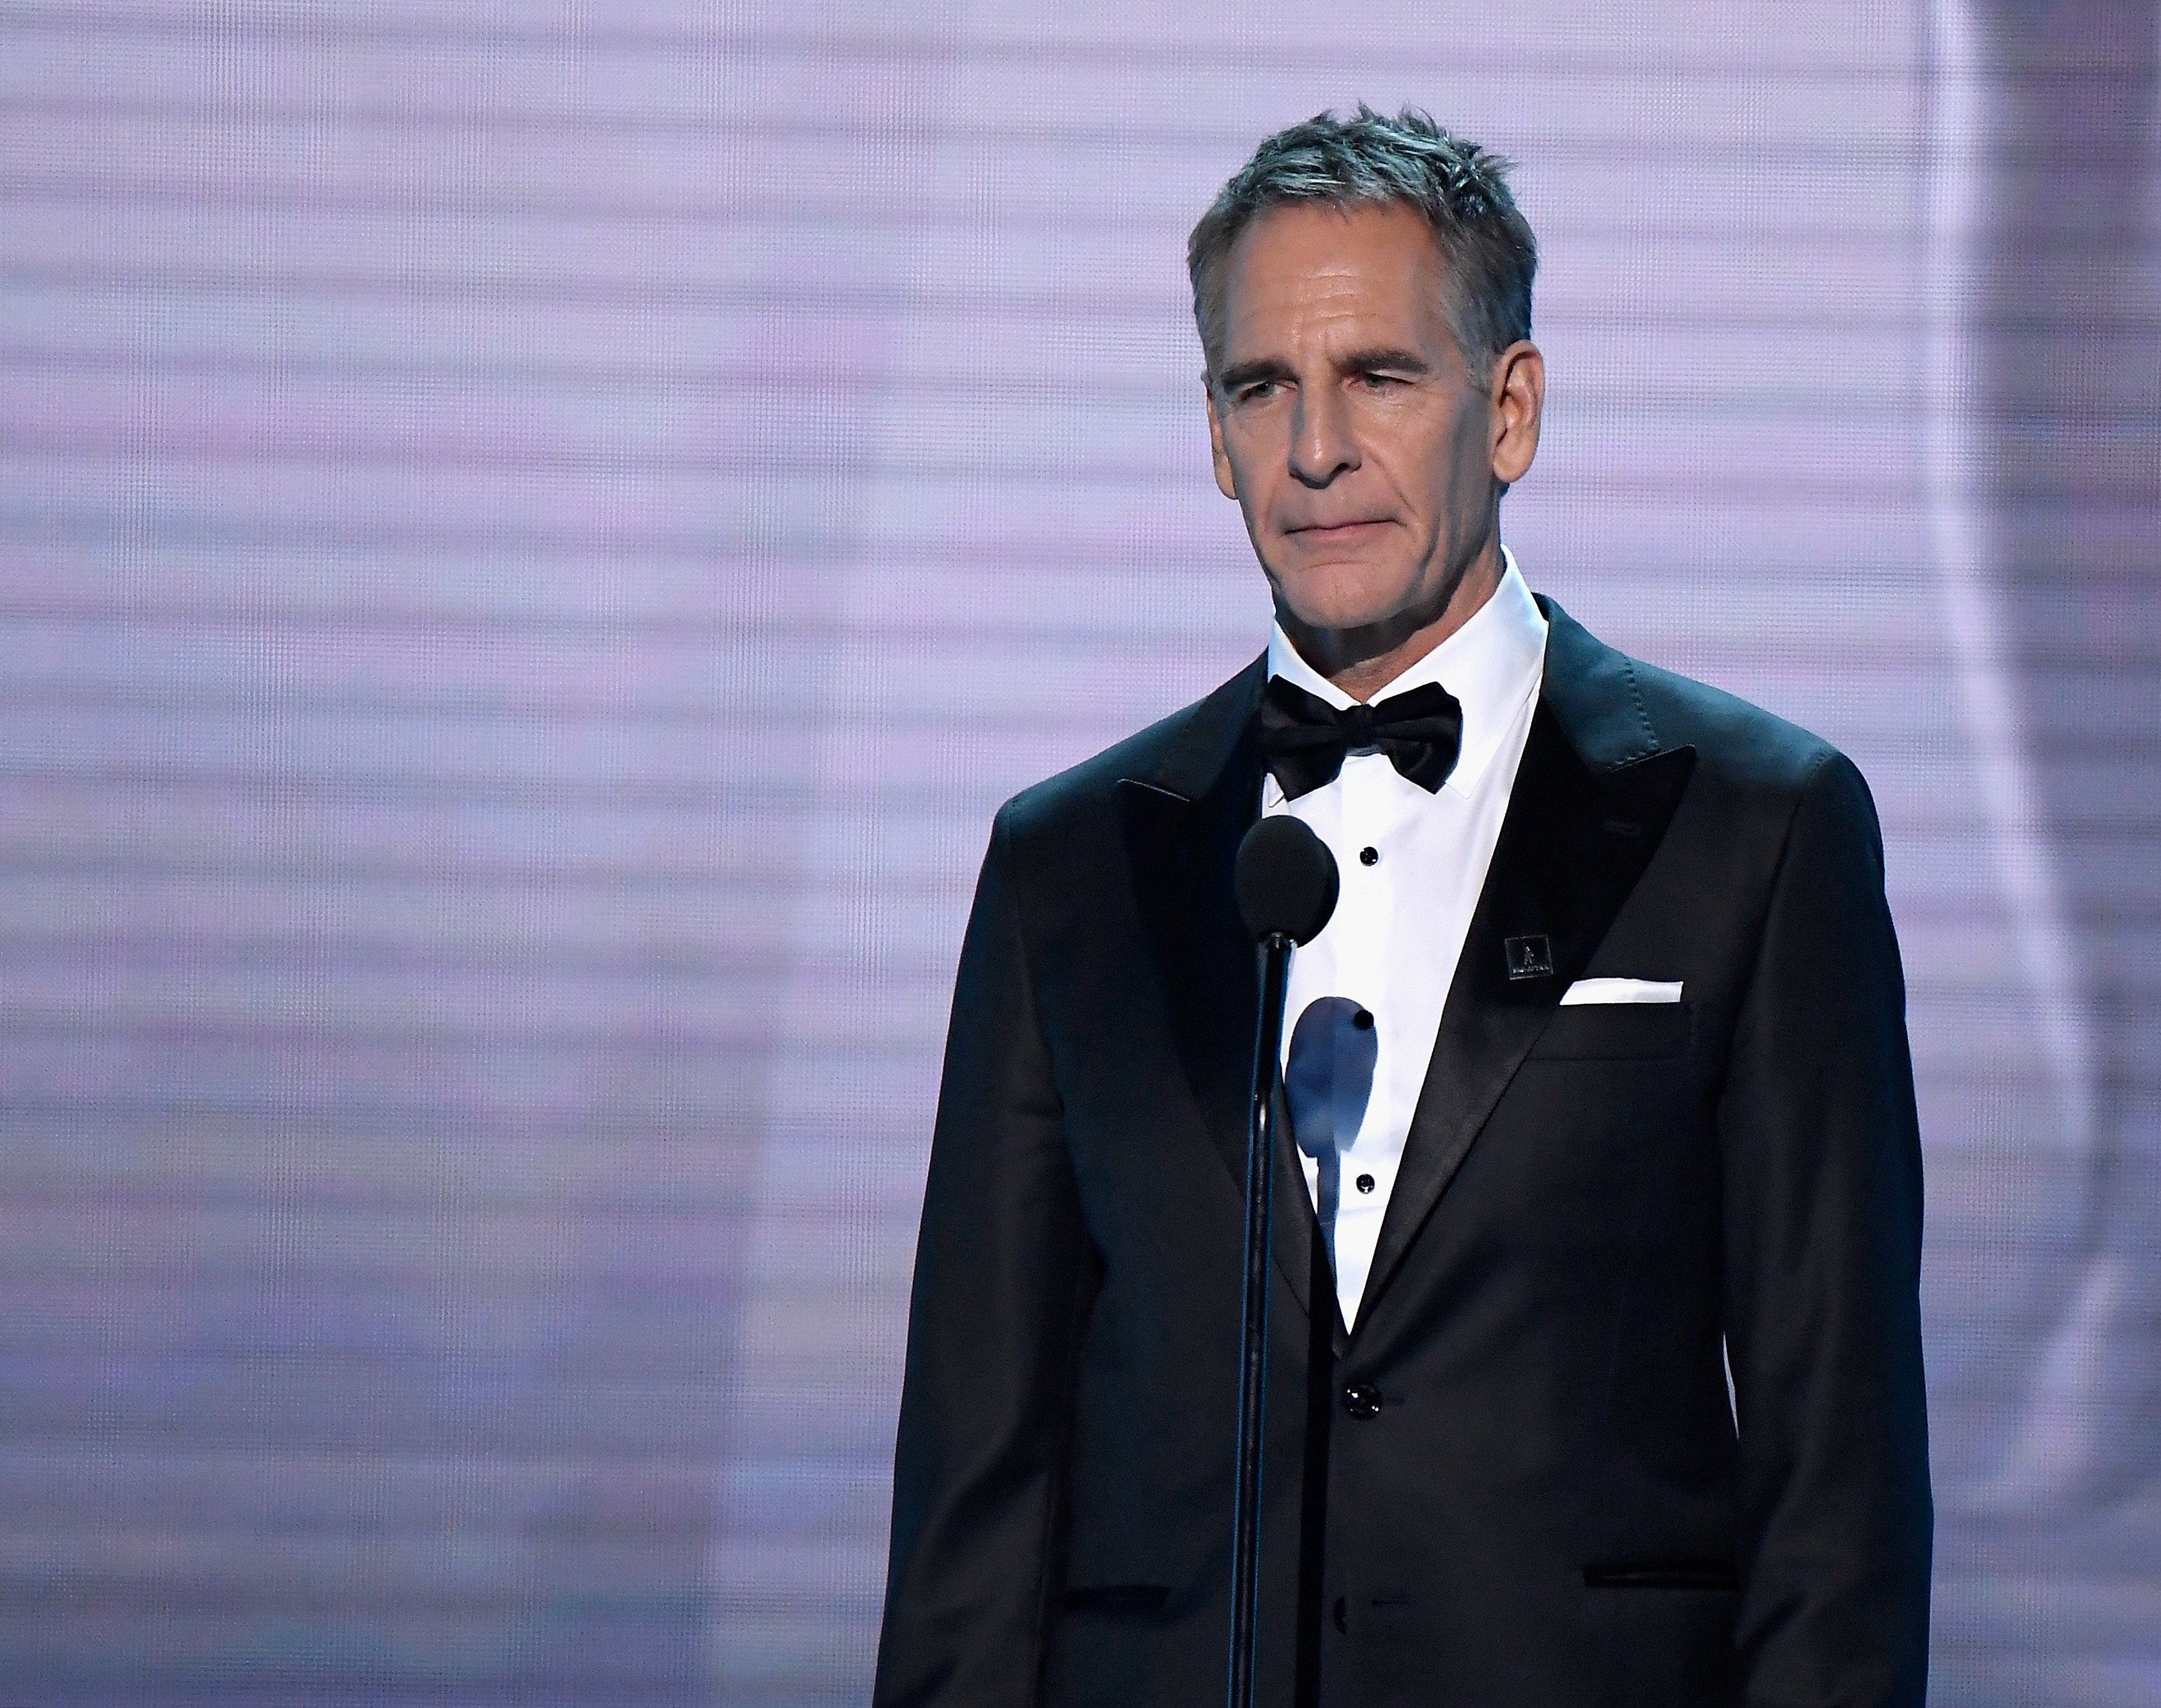 Scott Bakula onstage during the 25th Annual Screen Actors Guild Awards at The Shrine Auditorium on January 27, 2019, in Los Angeles, California. | Source: Getty Images.